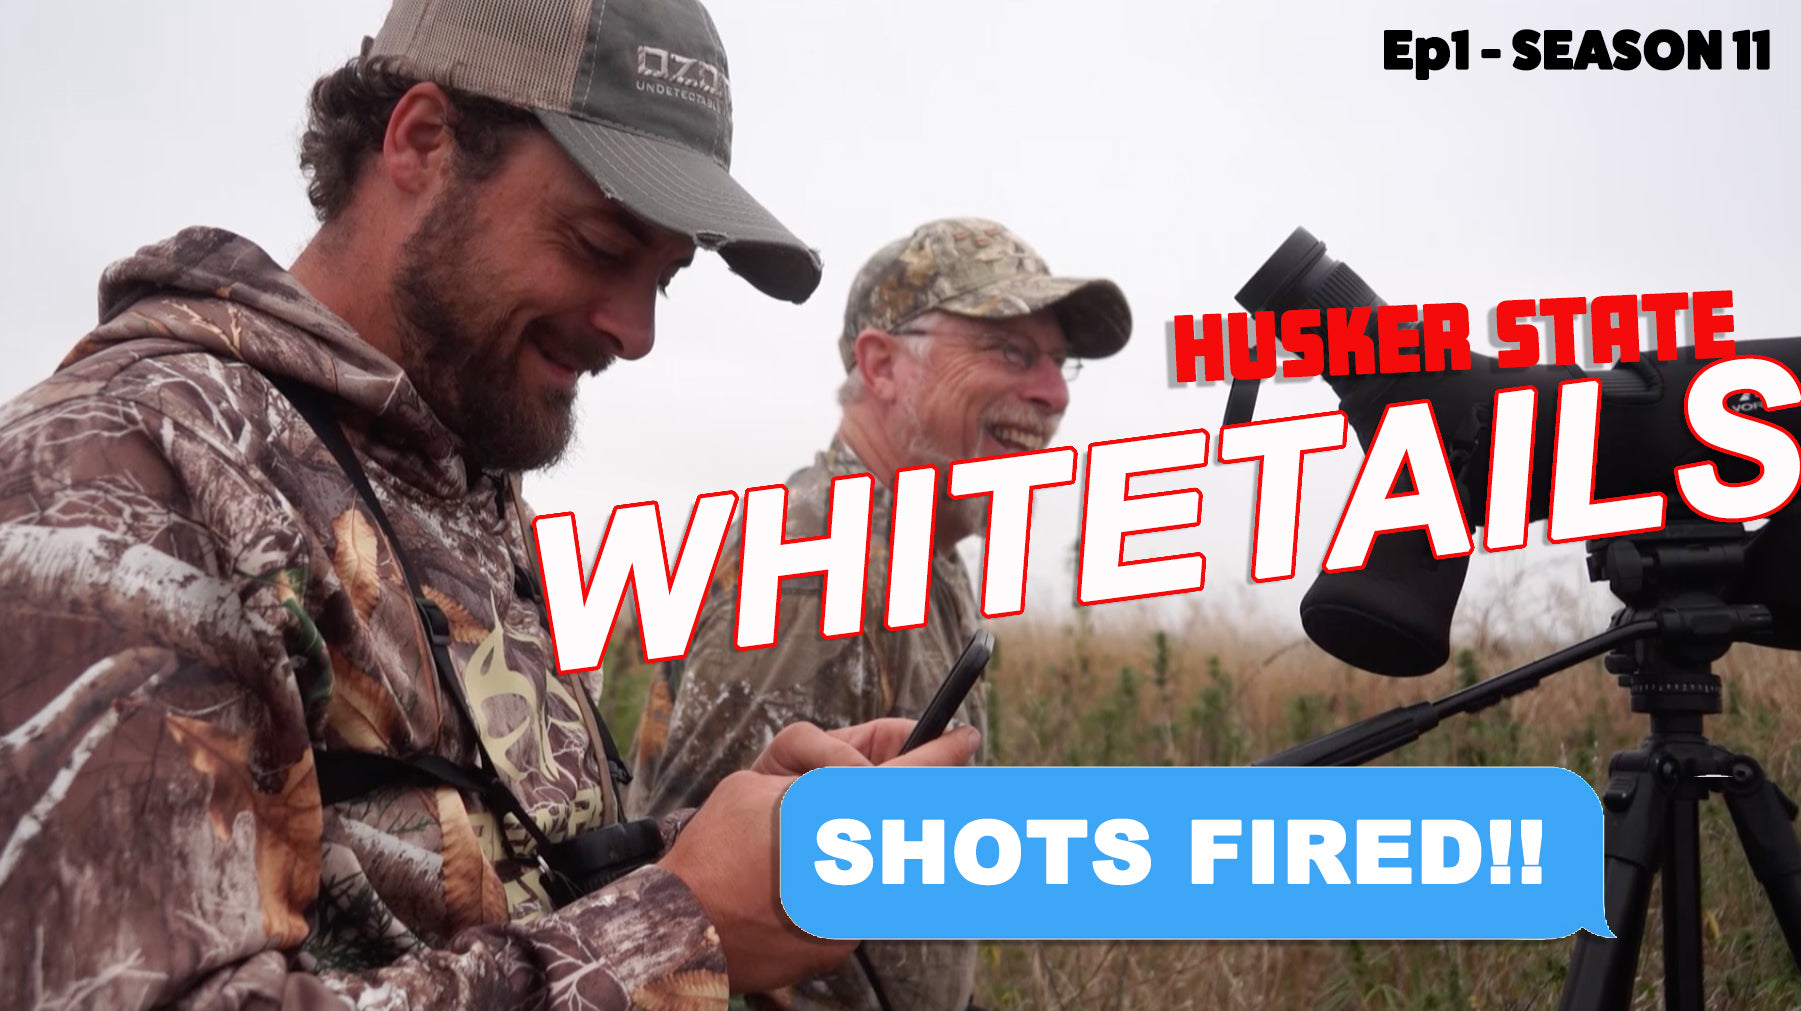 Husker State Whitetails Ep. 1